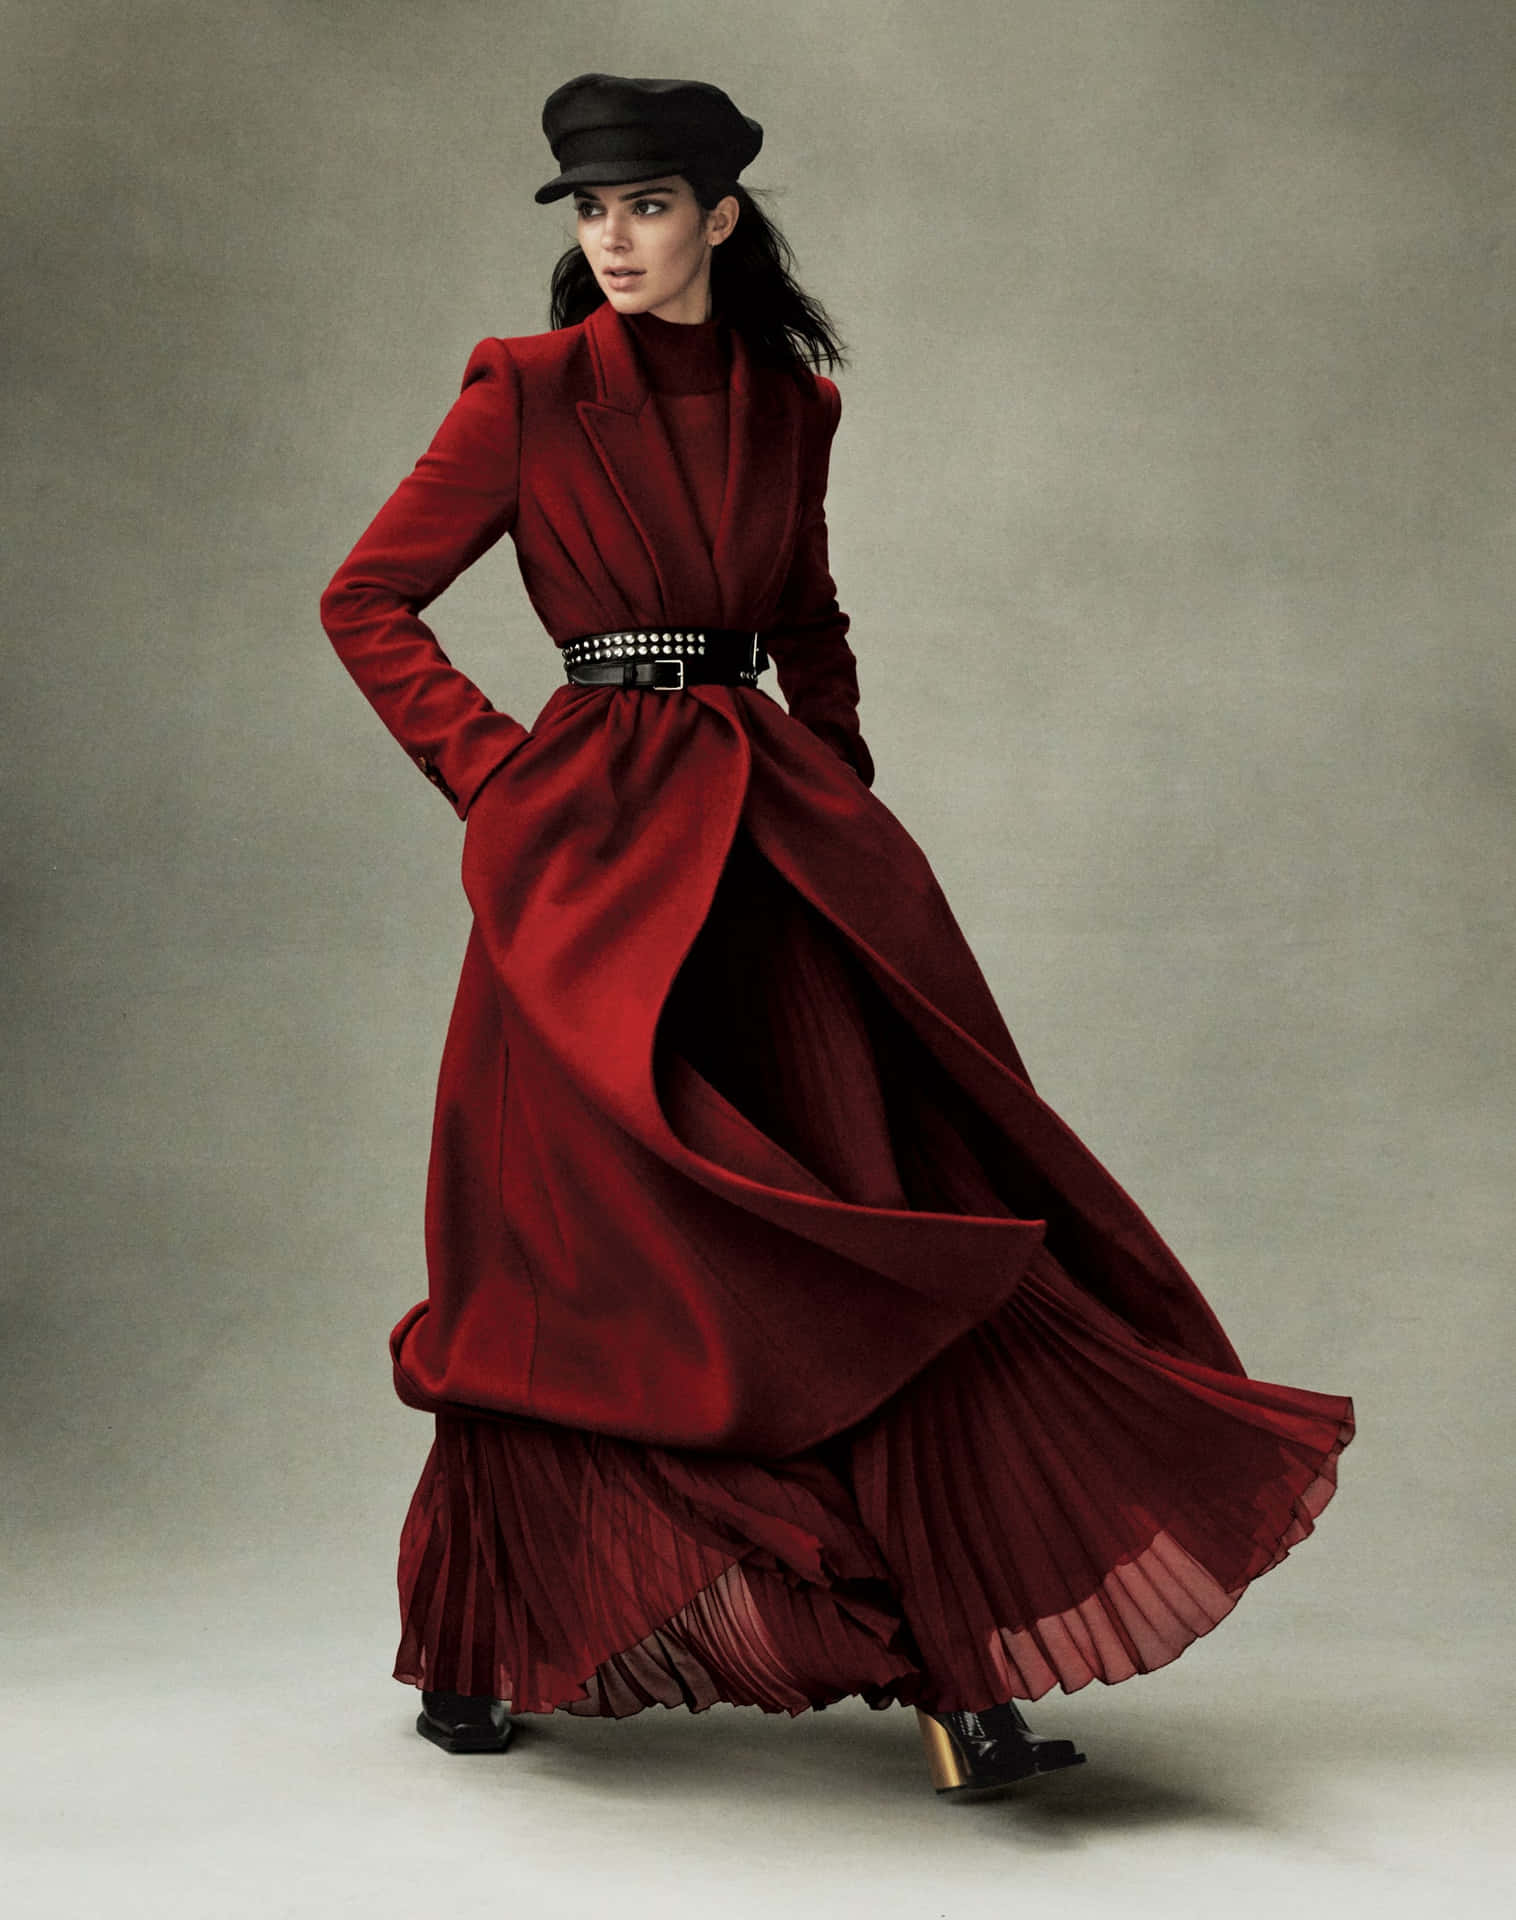 Stylish Red Clothing for an Elegant Look Wallpaper